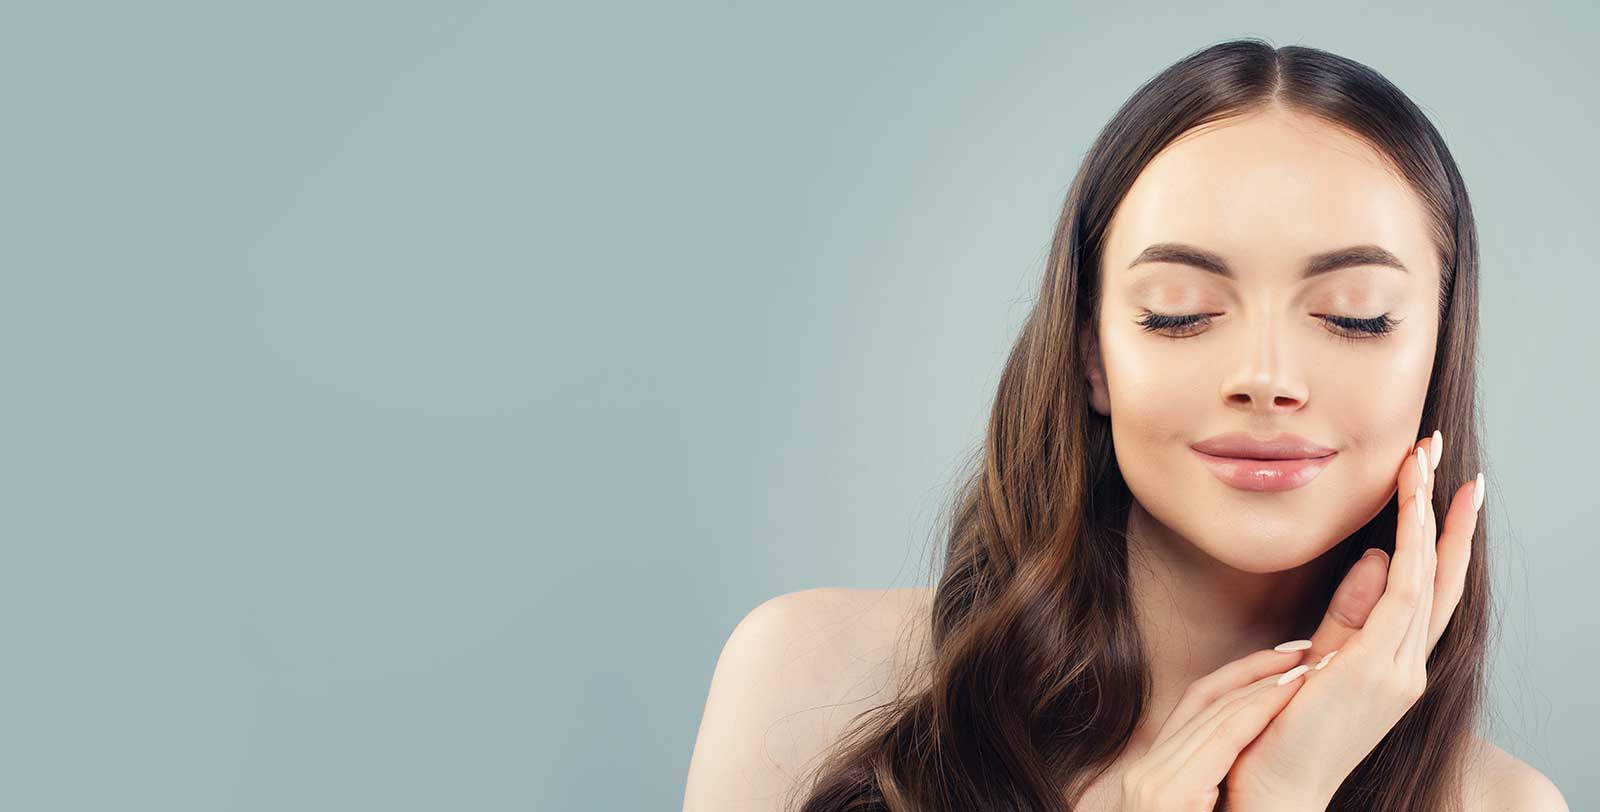 What Are the Benefits of Microneedling?